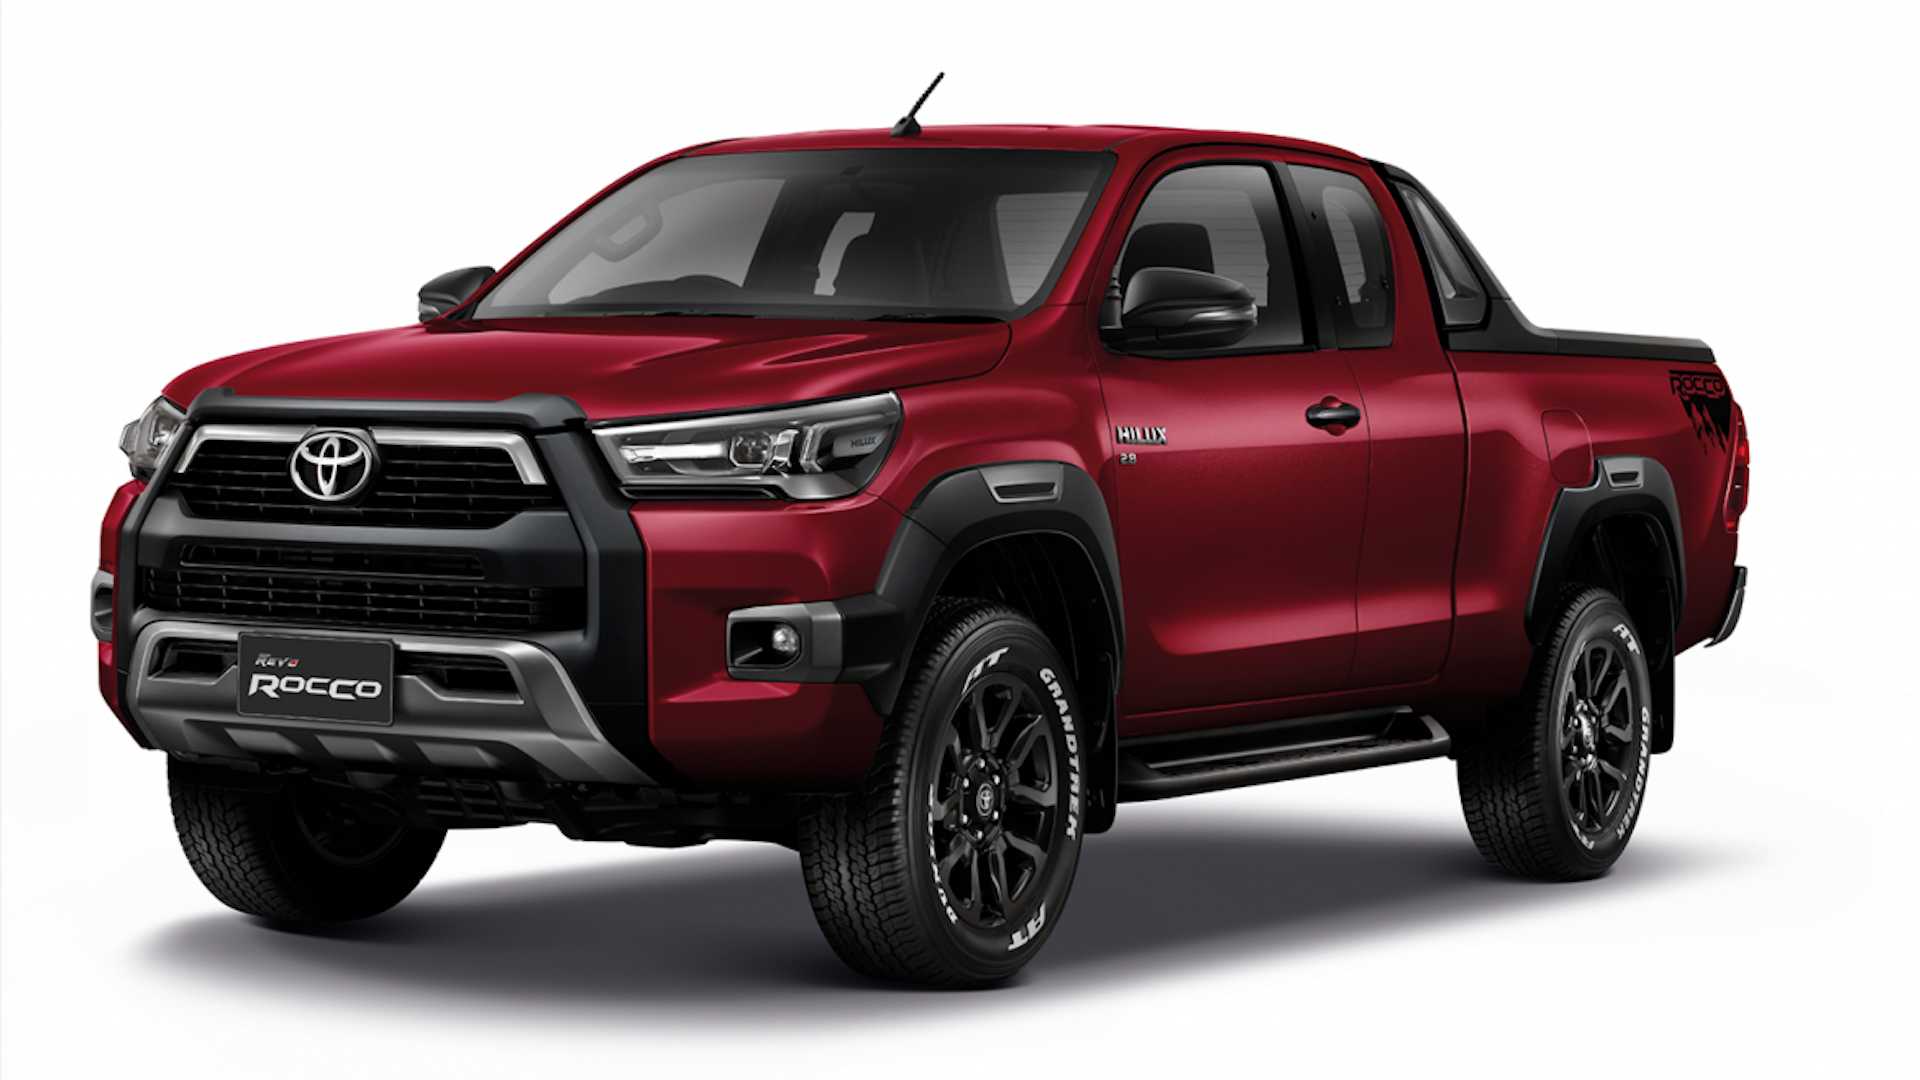 2021-toyota-hilux-launched-in-thailand-1.jpg